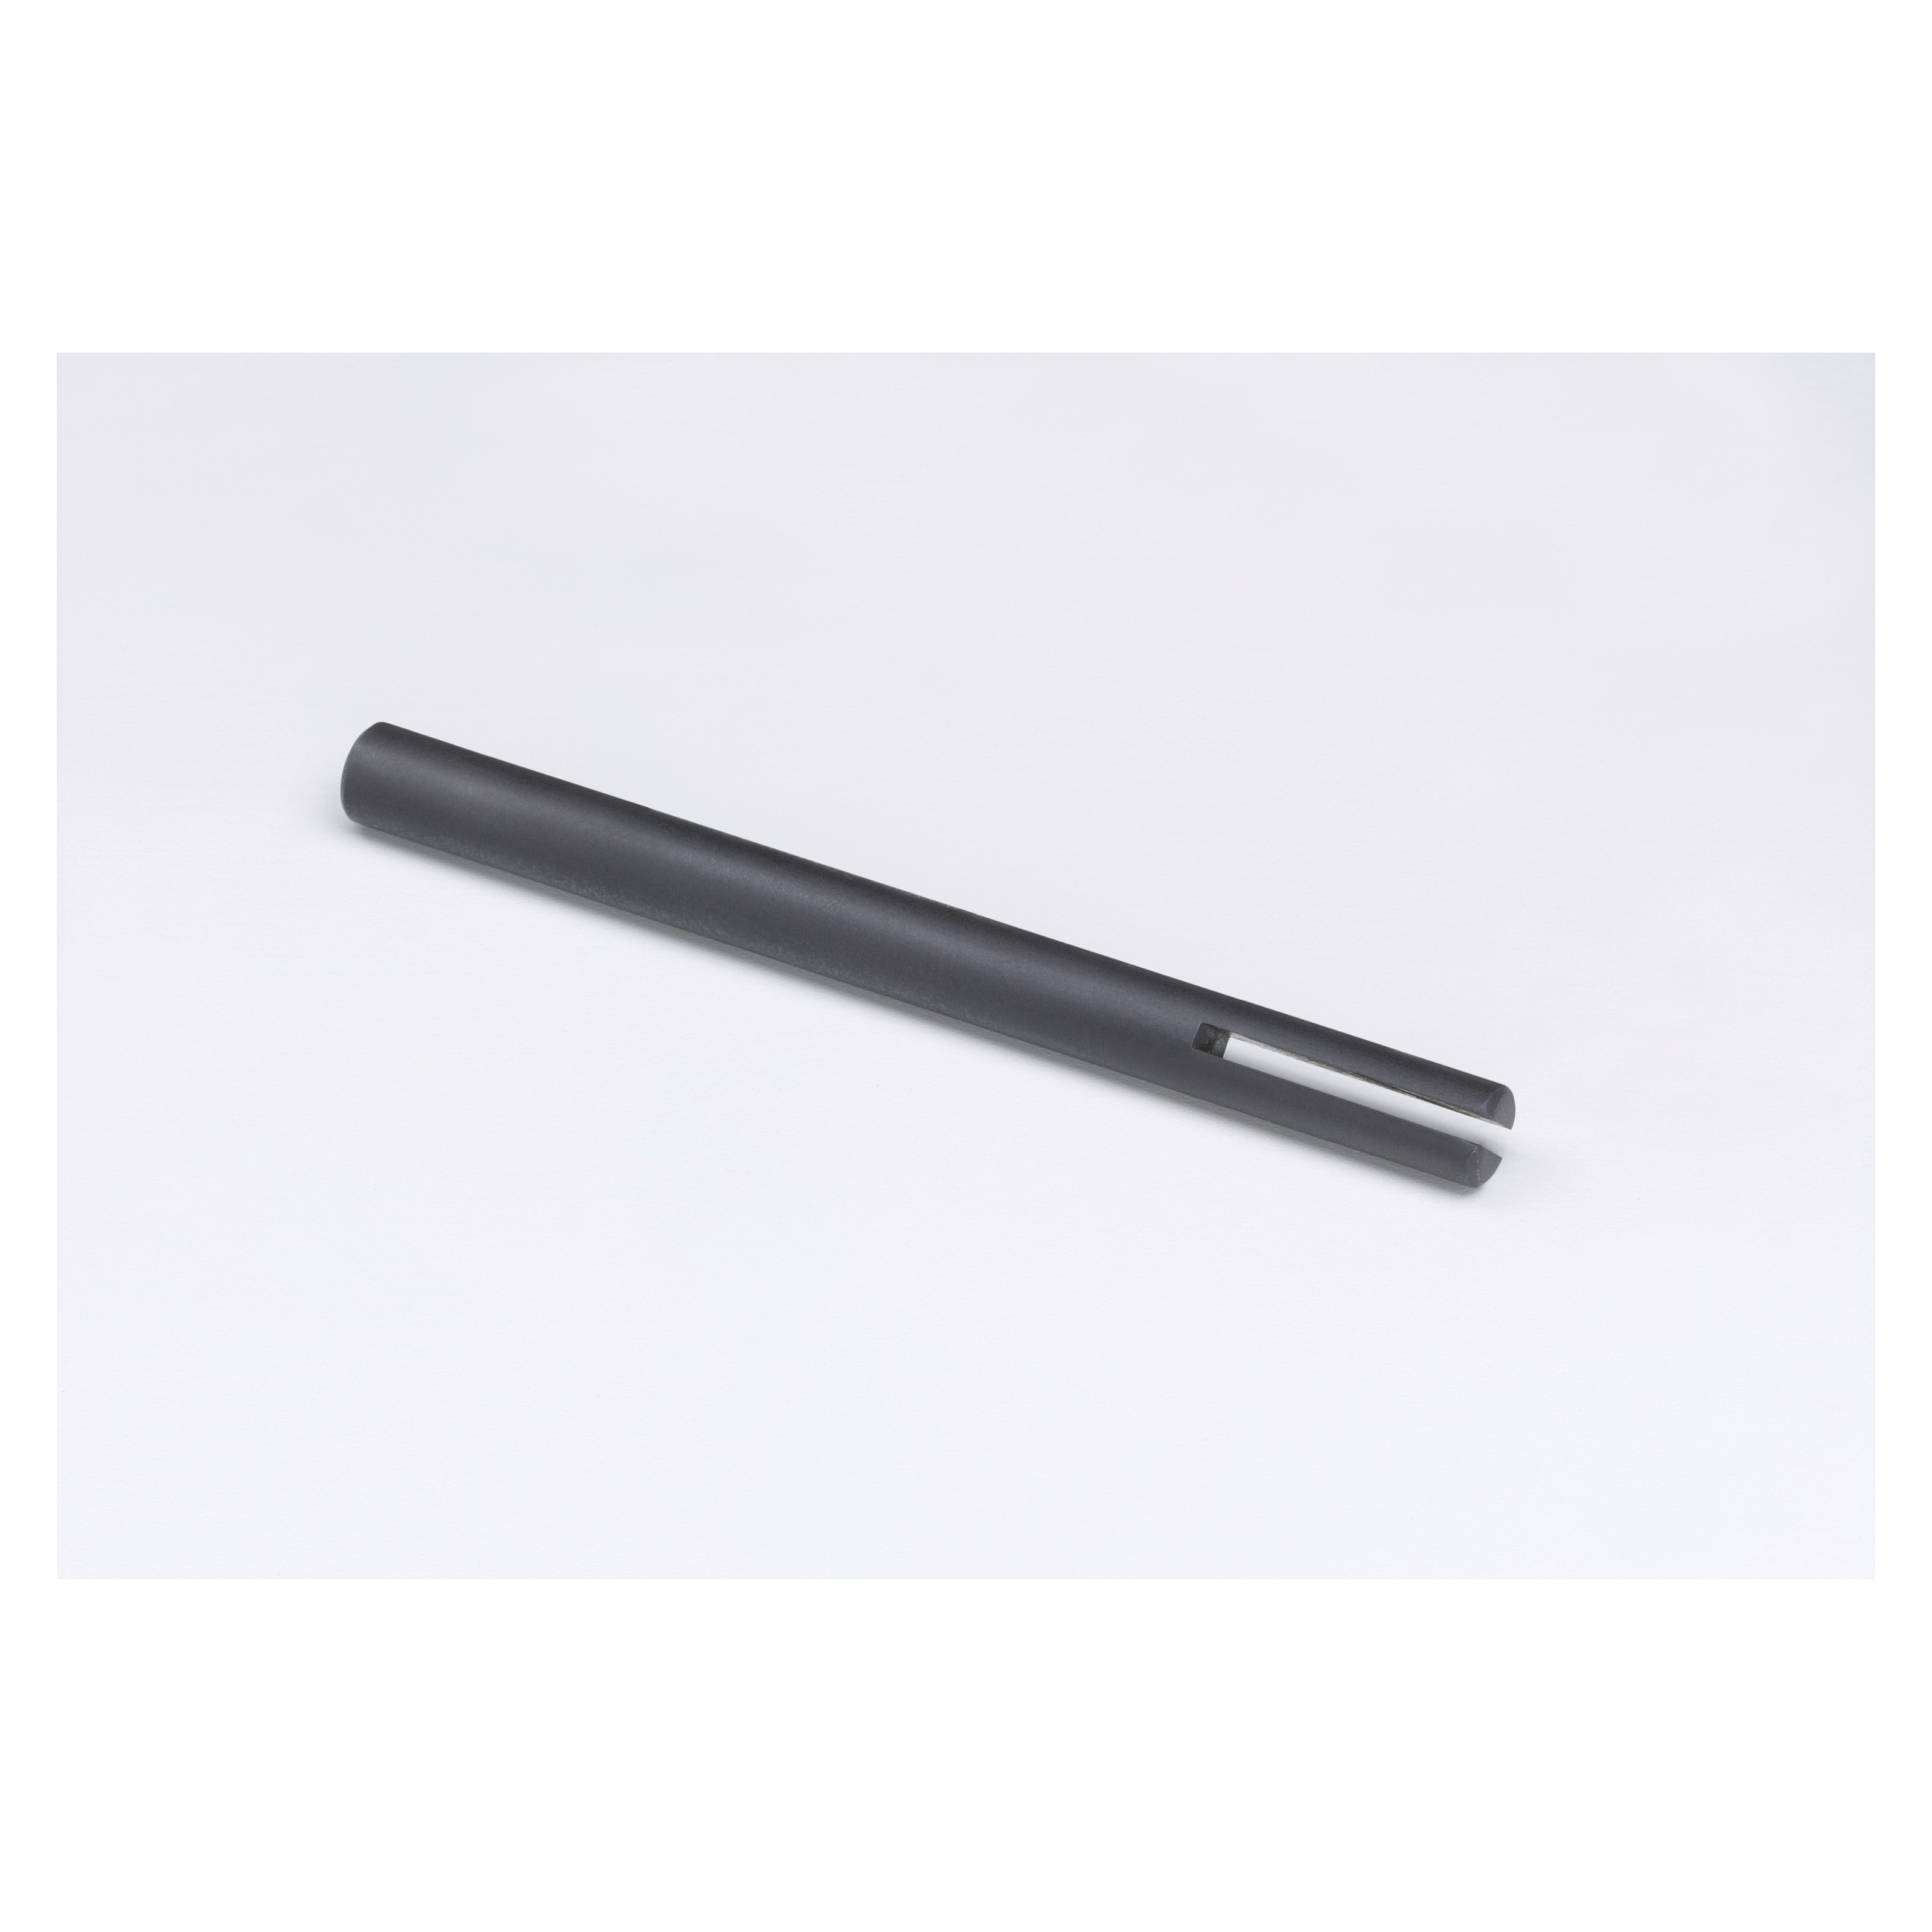 3M™ 051144-45121 Forked Spindle, 1/4 in Dia, 3 in OAL